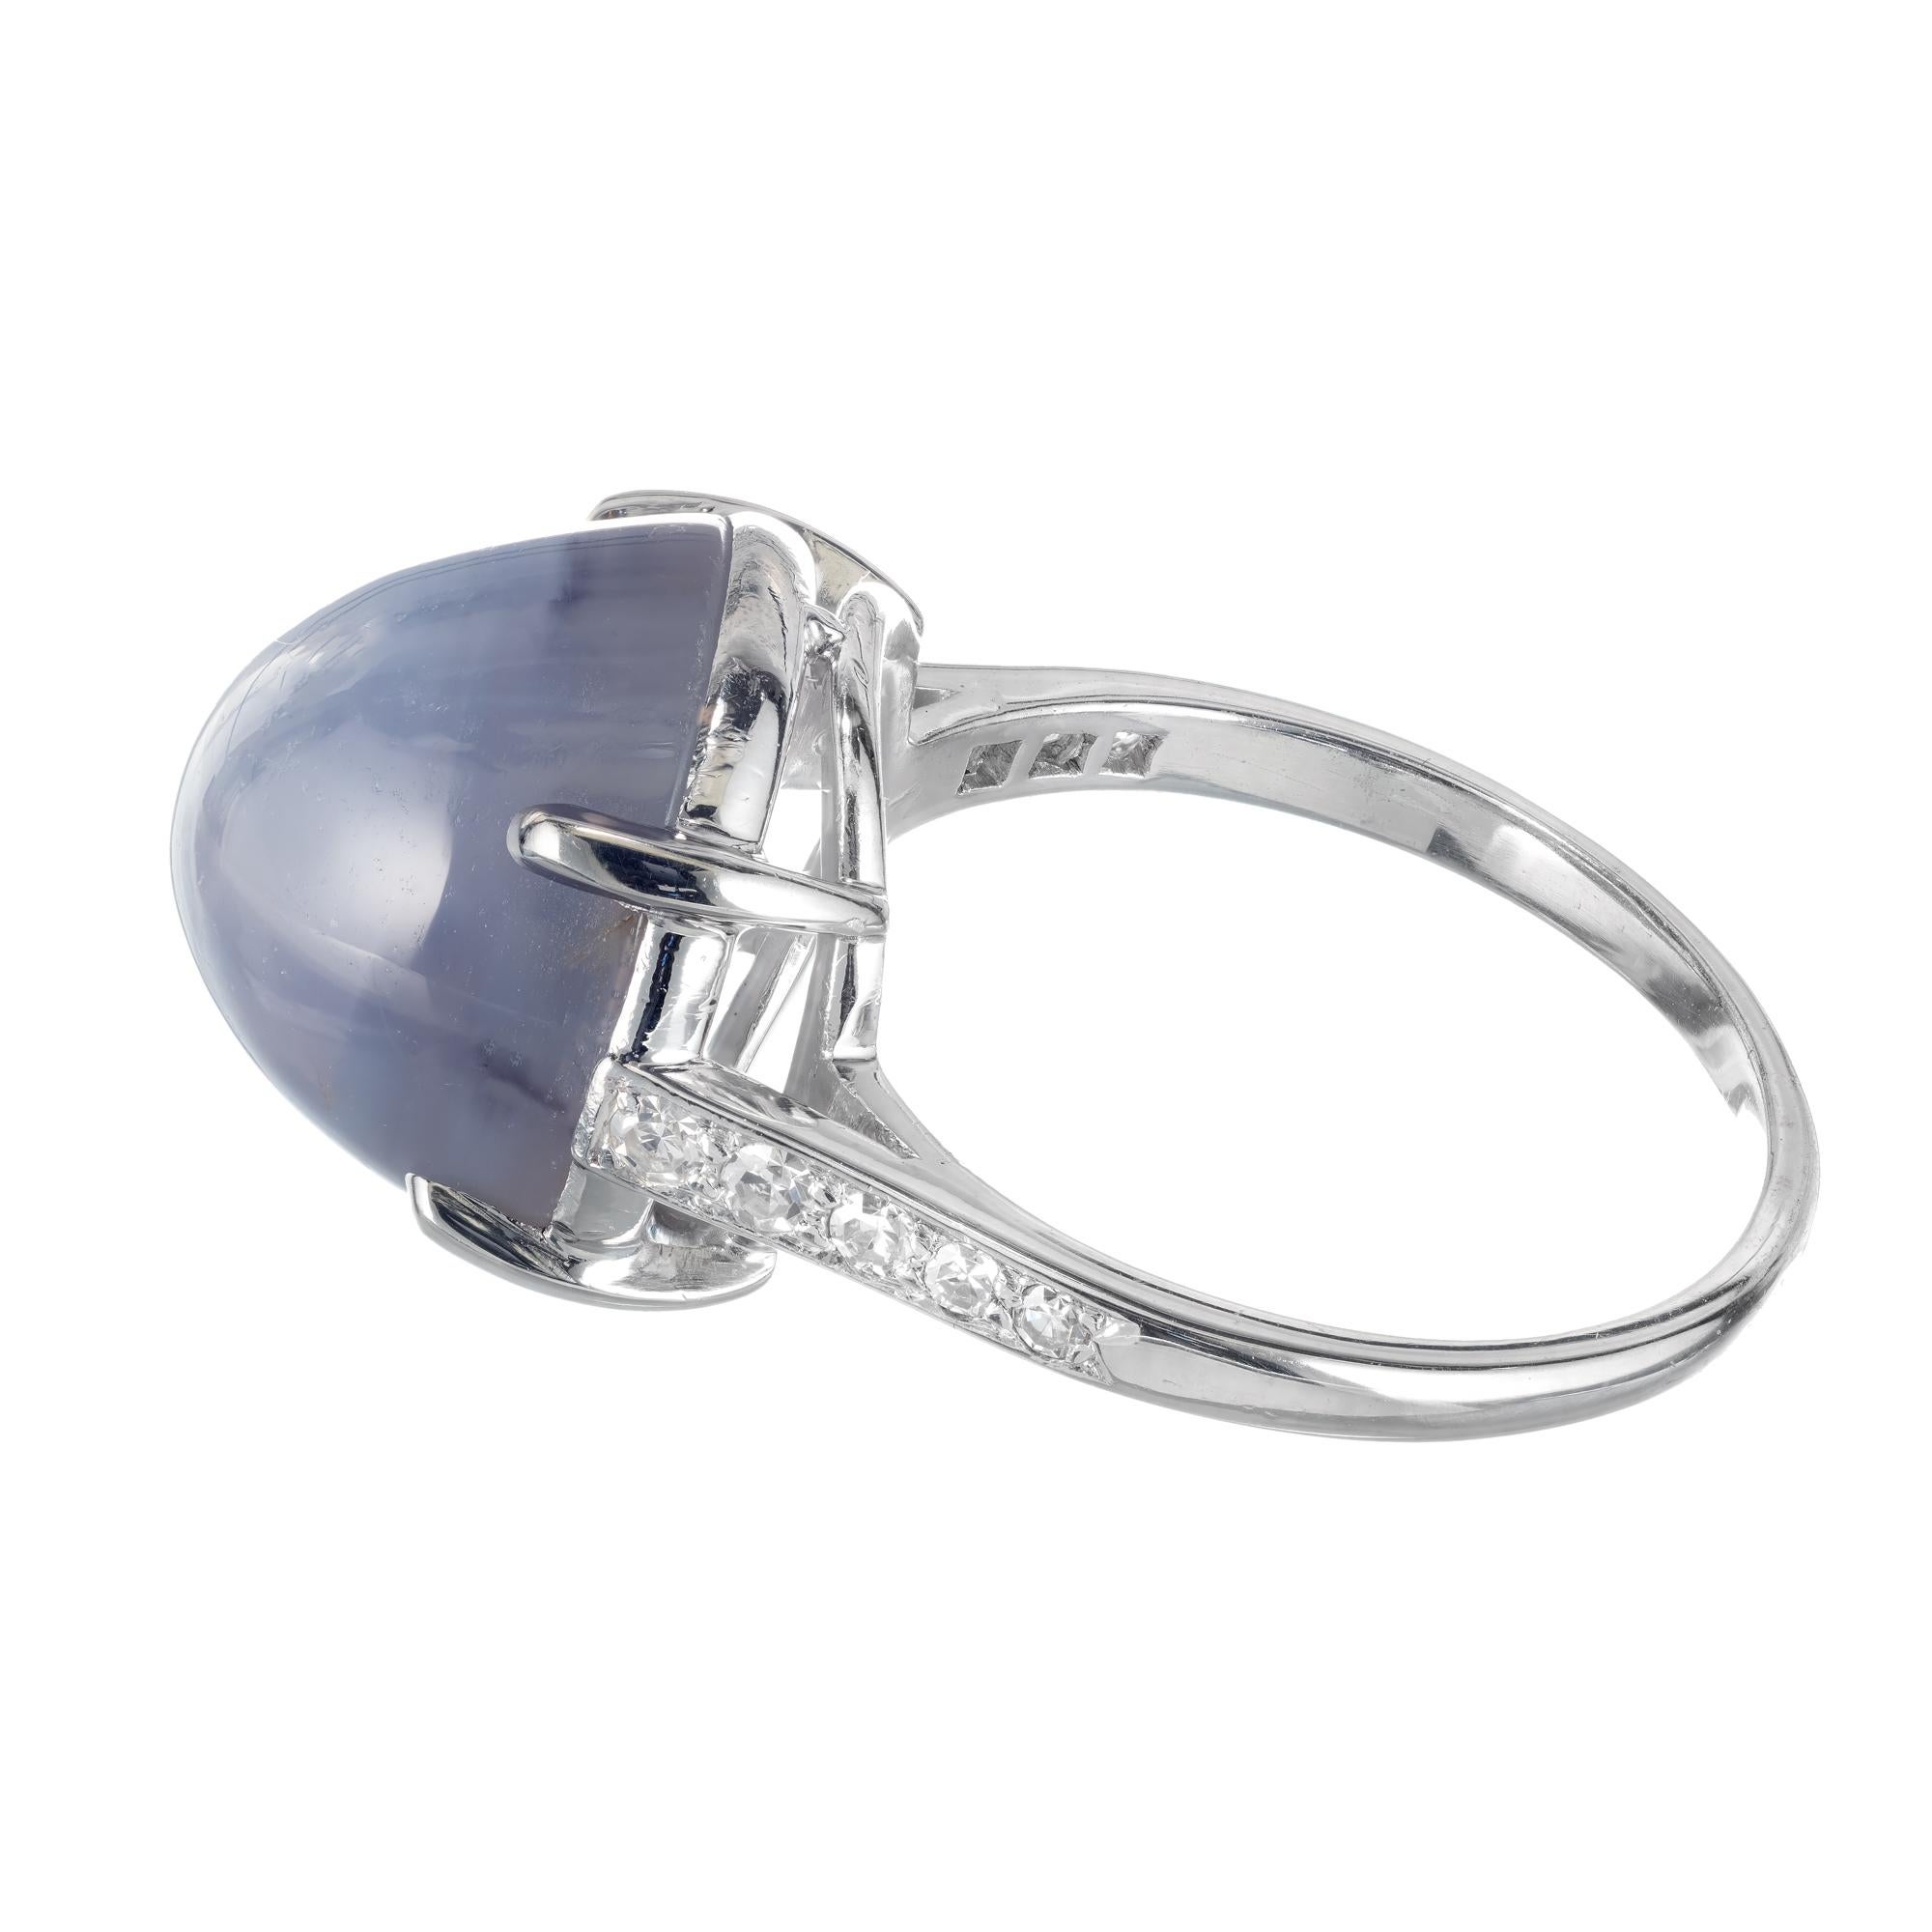 Star sapphire and diamond cabochon engagement ring. Circa 1960's translucent light violet blue star sapphire diamond in a platinum setting with round accent diamonds. 

1 oval cabochon violet blue star sapphire, Approximate 19.0cts GIA Certificate #